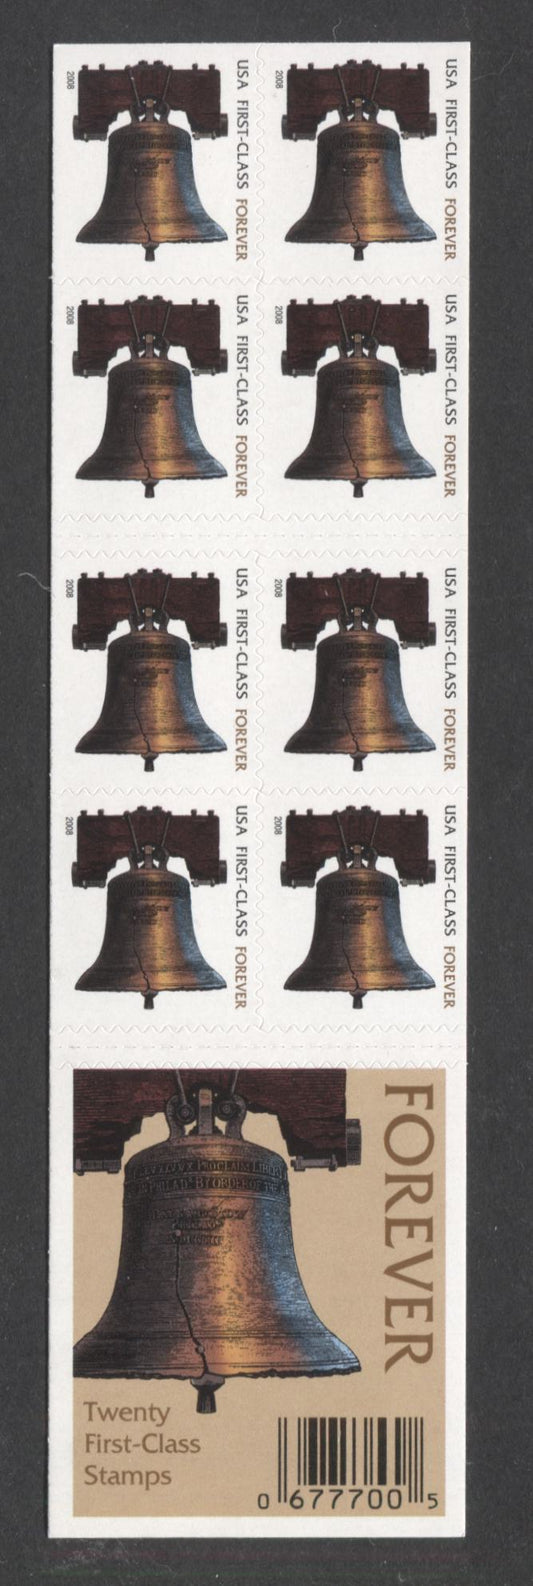 Lot 28 United States SC#4126c First Class Multicolored 2008 Liberty Bell Issue, Double Sided Booklet, Dated 2008, Small Microprinting, A VFNH Booklet Of 20, Click on Listing to See ALL Pictures, 2017 Scott Cat. $18